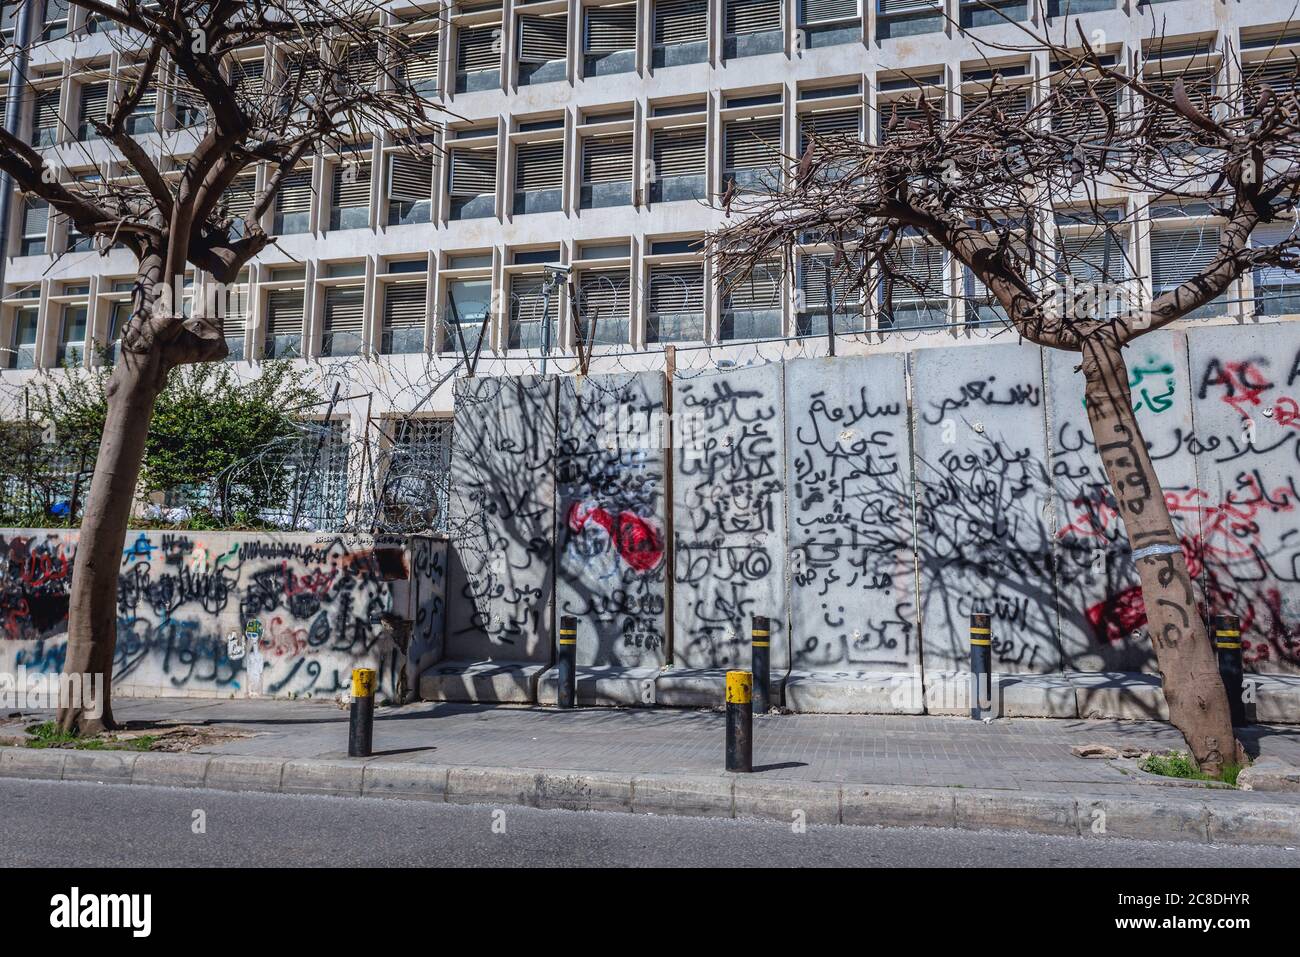 Painted wall in front of goverment building after 2019-2020 Lebanese protests in Beirut city, Lebanon Stock Photo